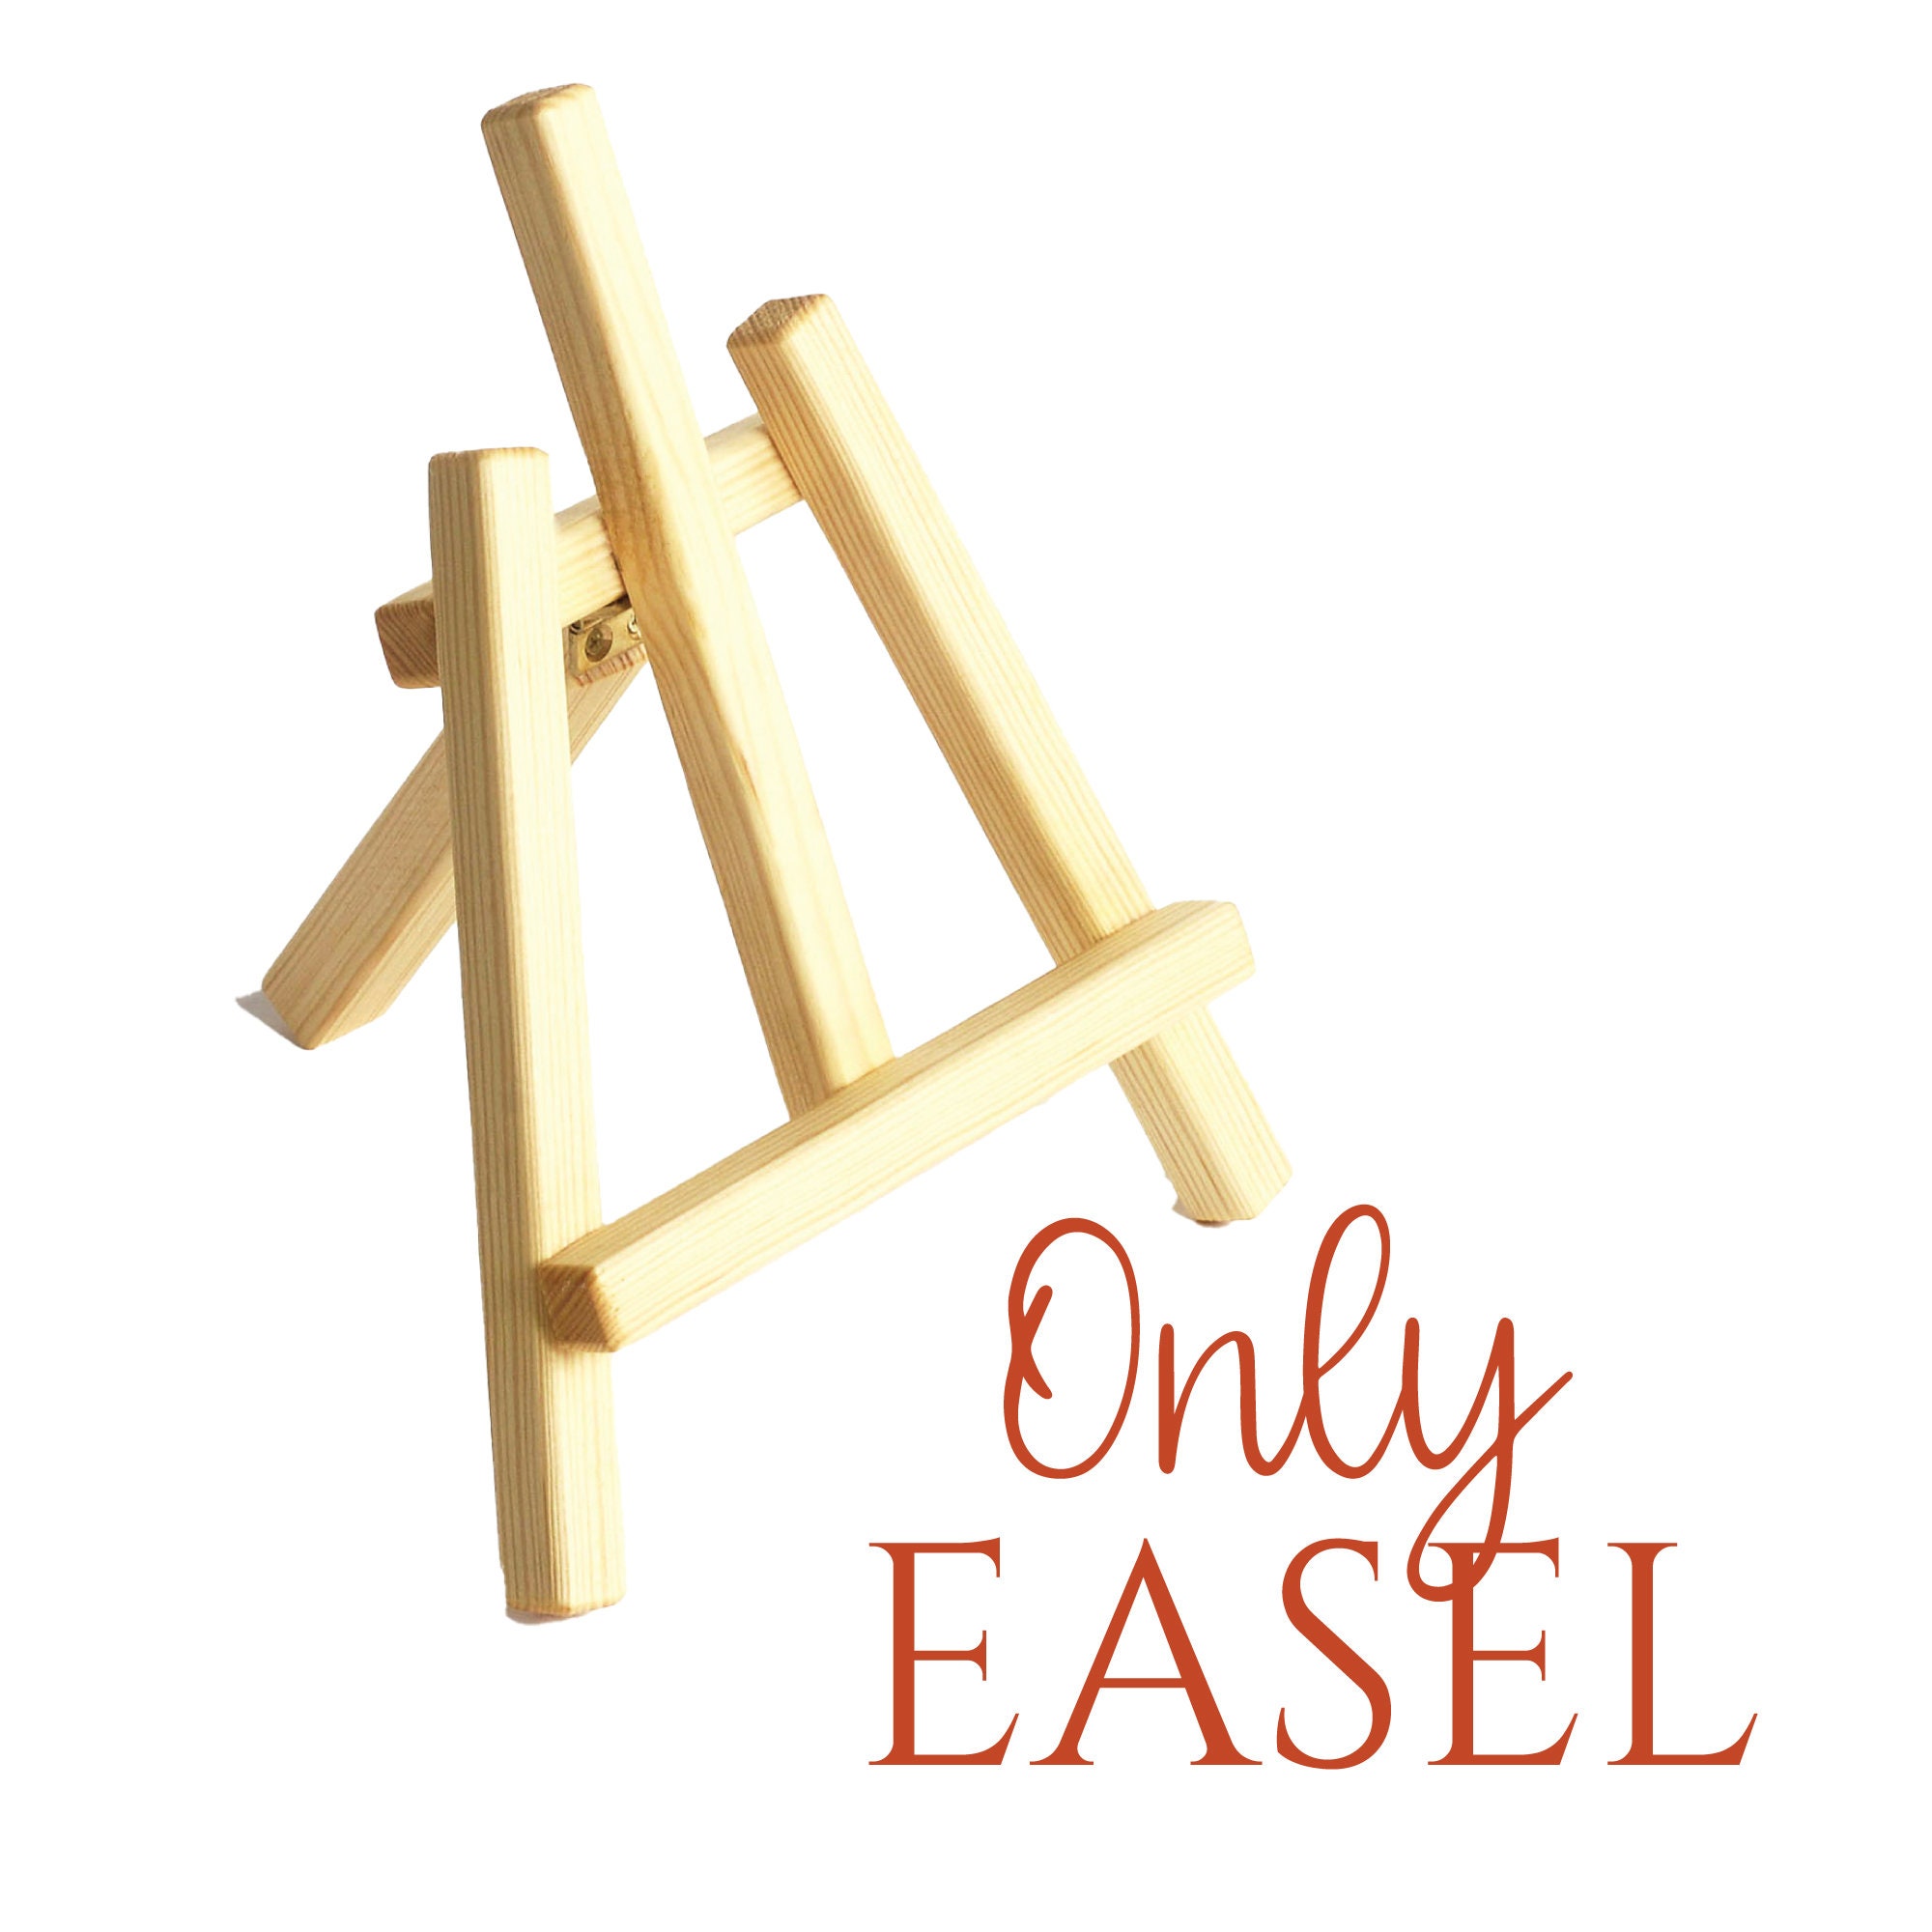 150 Pcs 5 Mini Wood Display Easel Small Easel Stand Artist Painting Party  Tripod Easel Tabletop Easel Stand for Small Painting Canvases, Kids Crafts